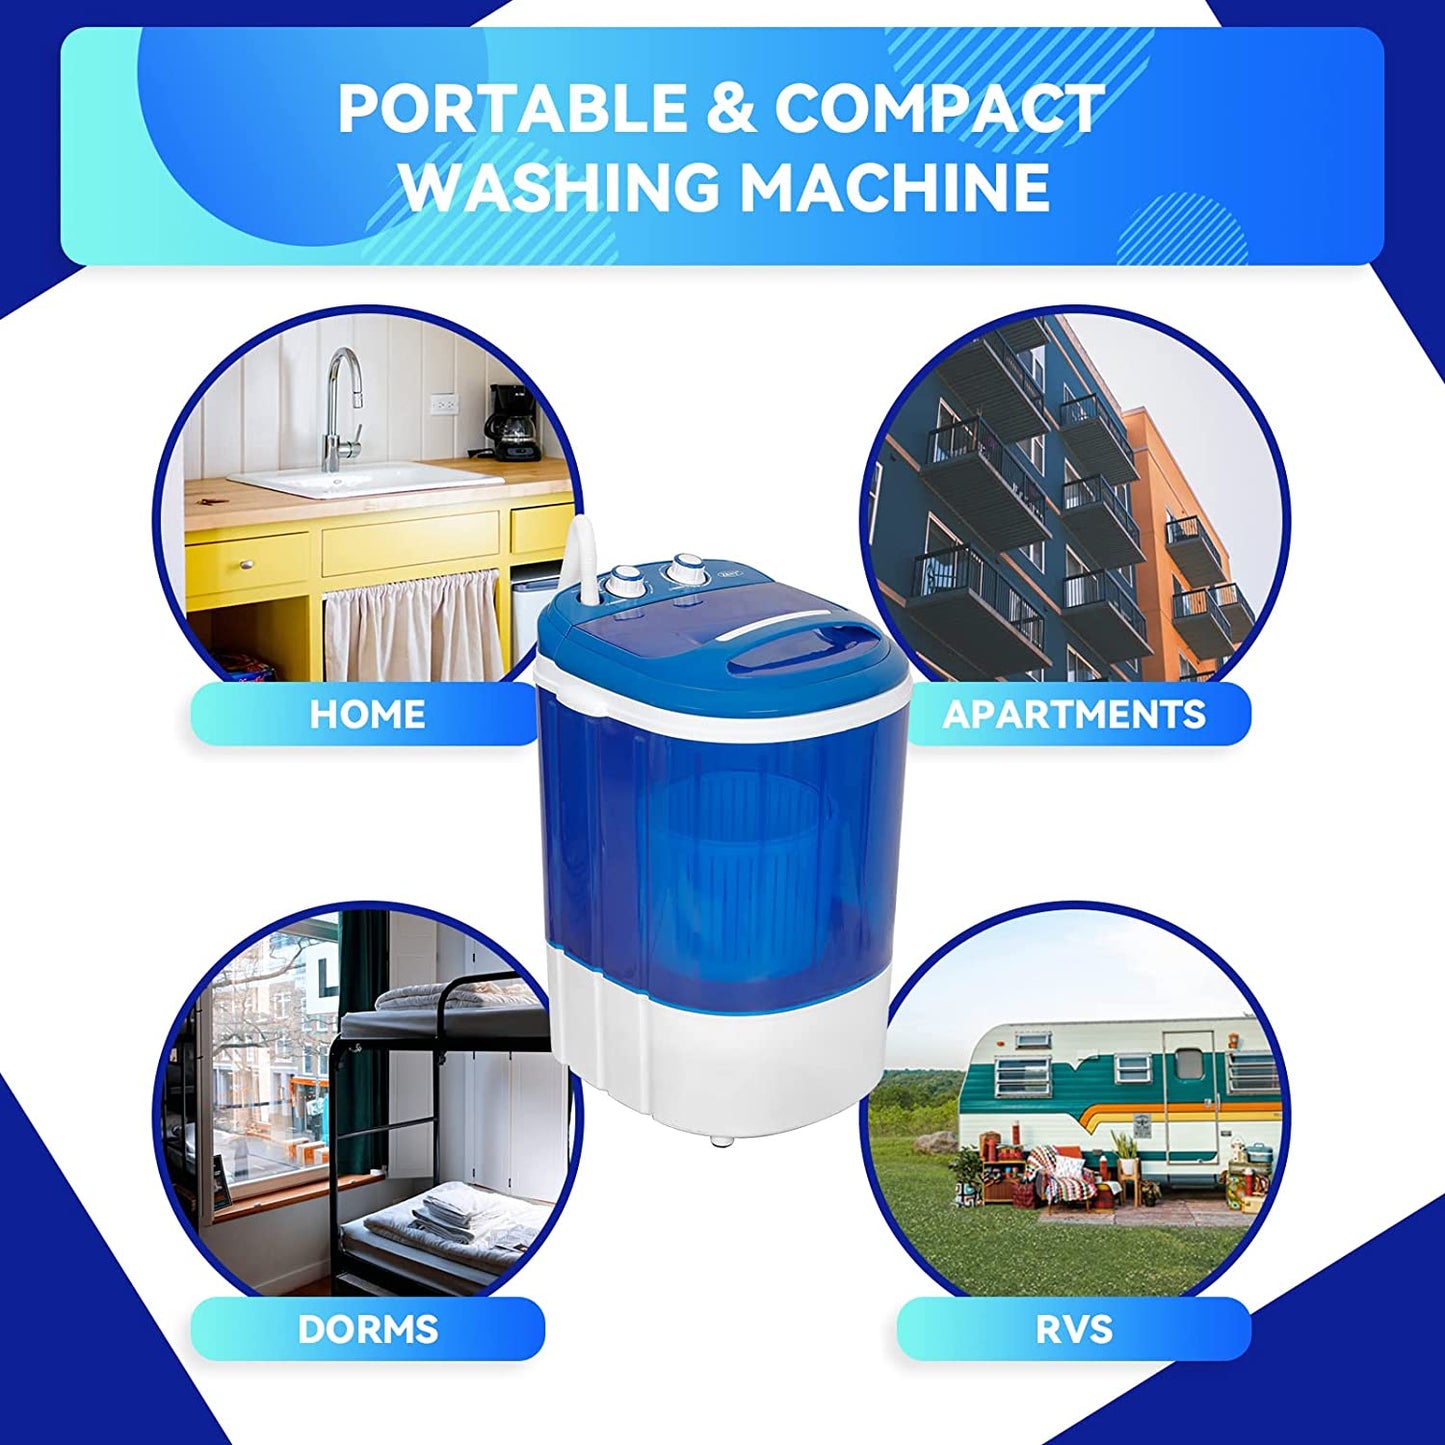 Portable Mini Washing Machine 5.7 lbs Washing Capacity Semi-Automatic Compact Washer Spinner Small Cloth Washer Laundry Appliances for Apartment, RV, Camping, Single Translucent Tub